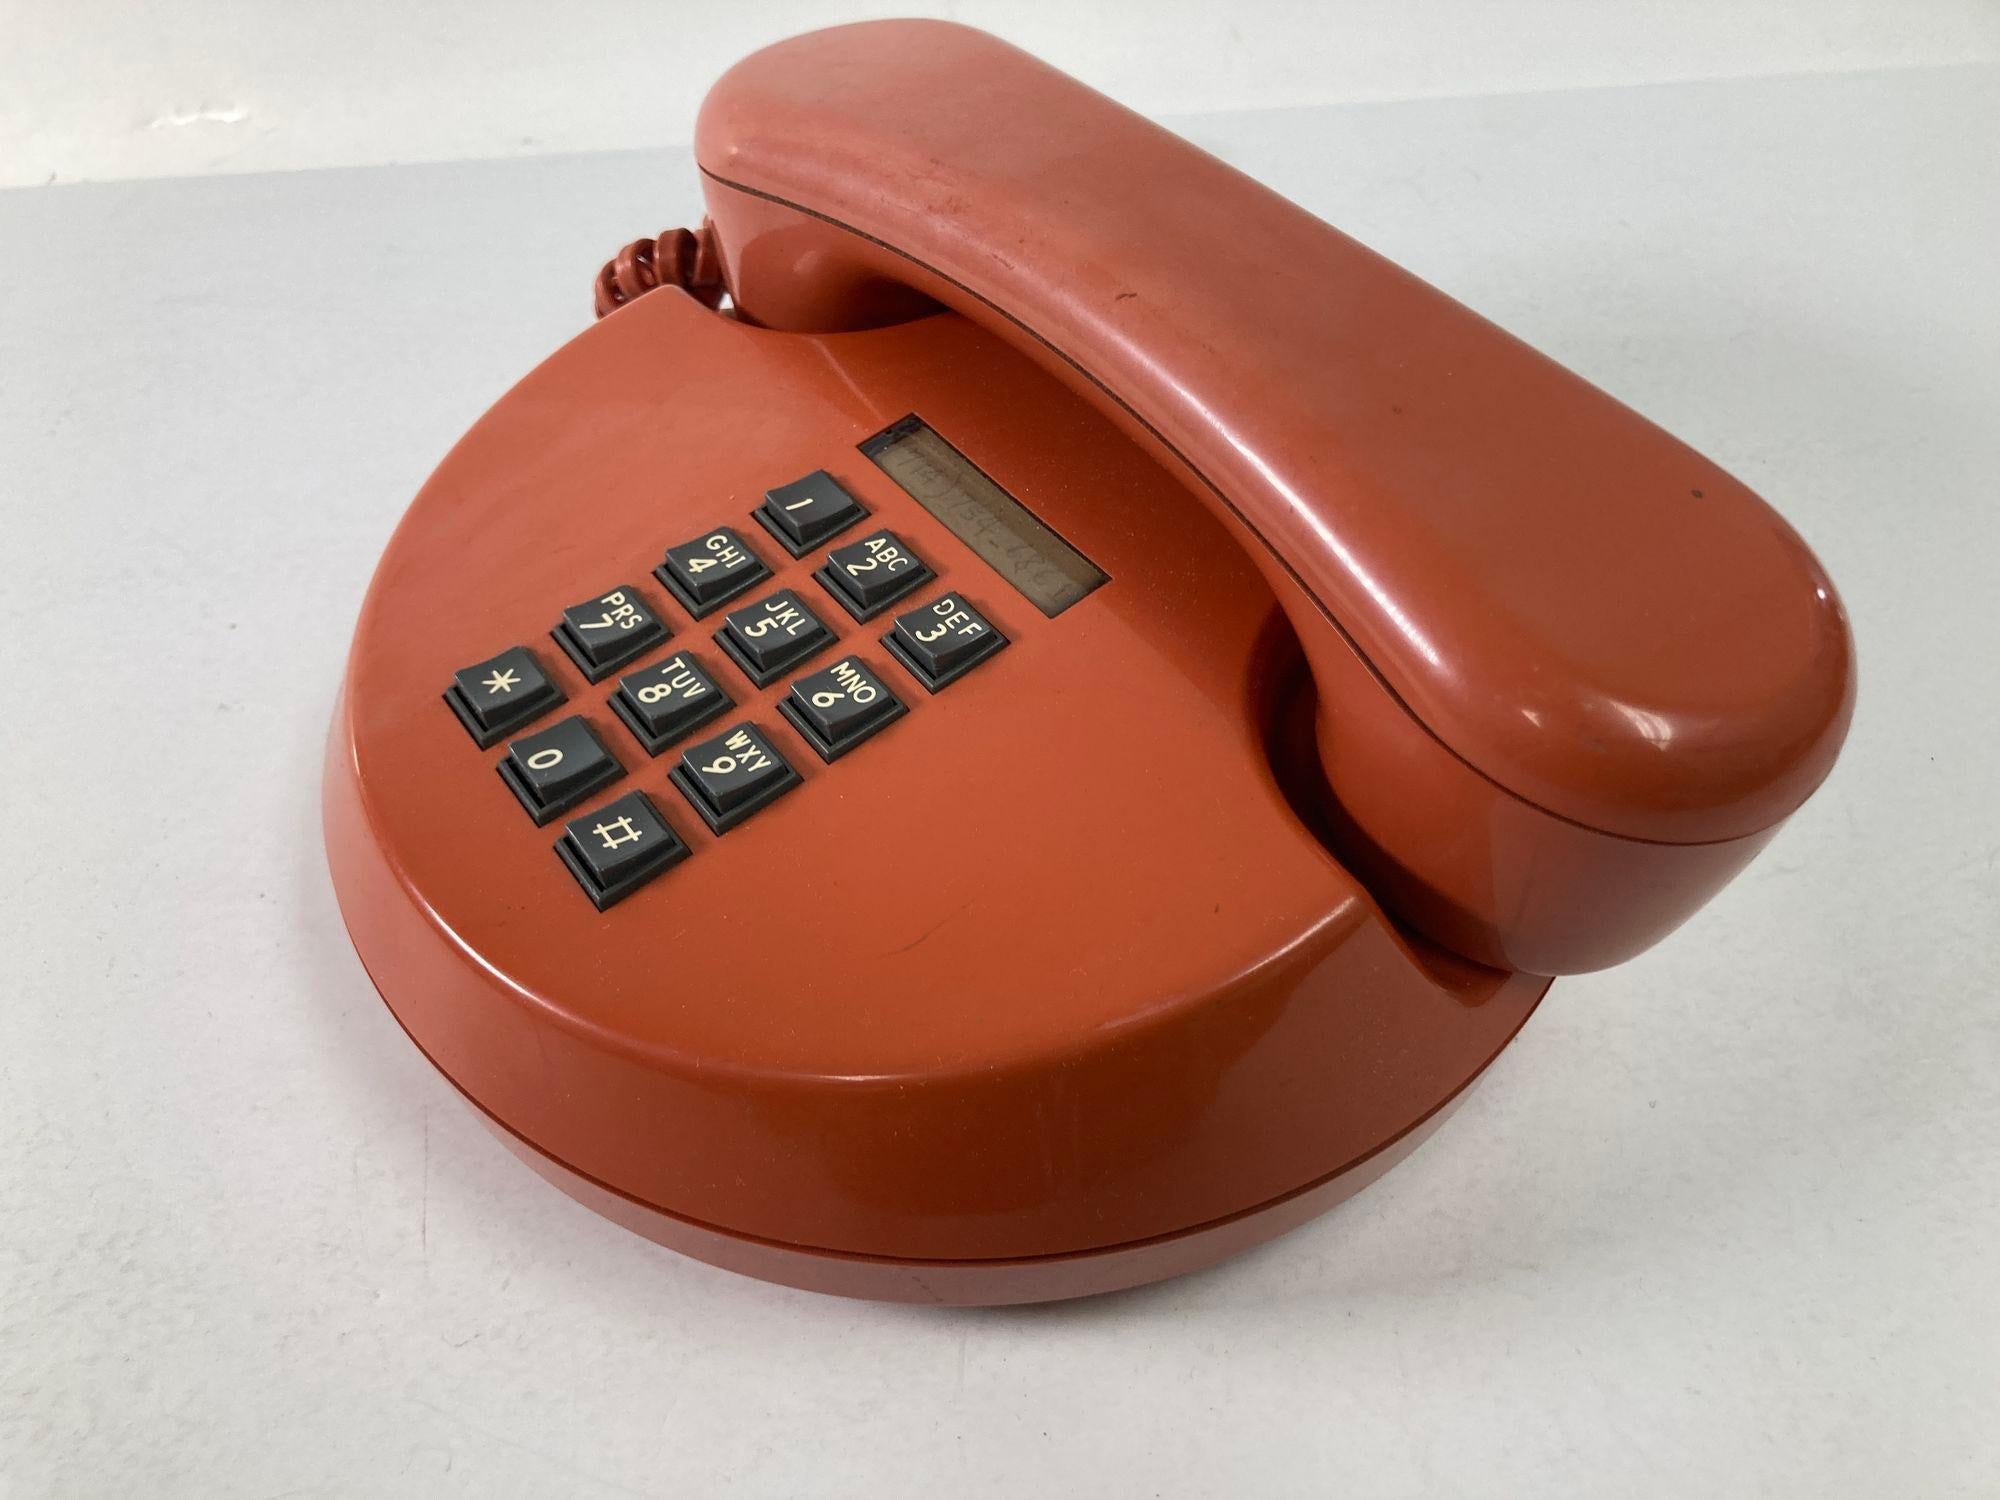 Vintage Retro Push-Button Round Telephone Burnt Orange Color from the, 70s 6